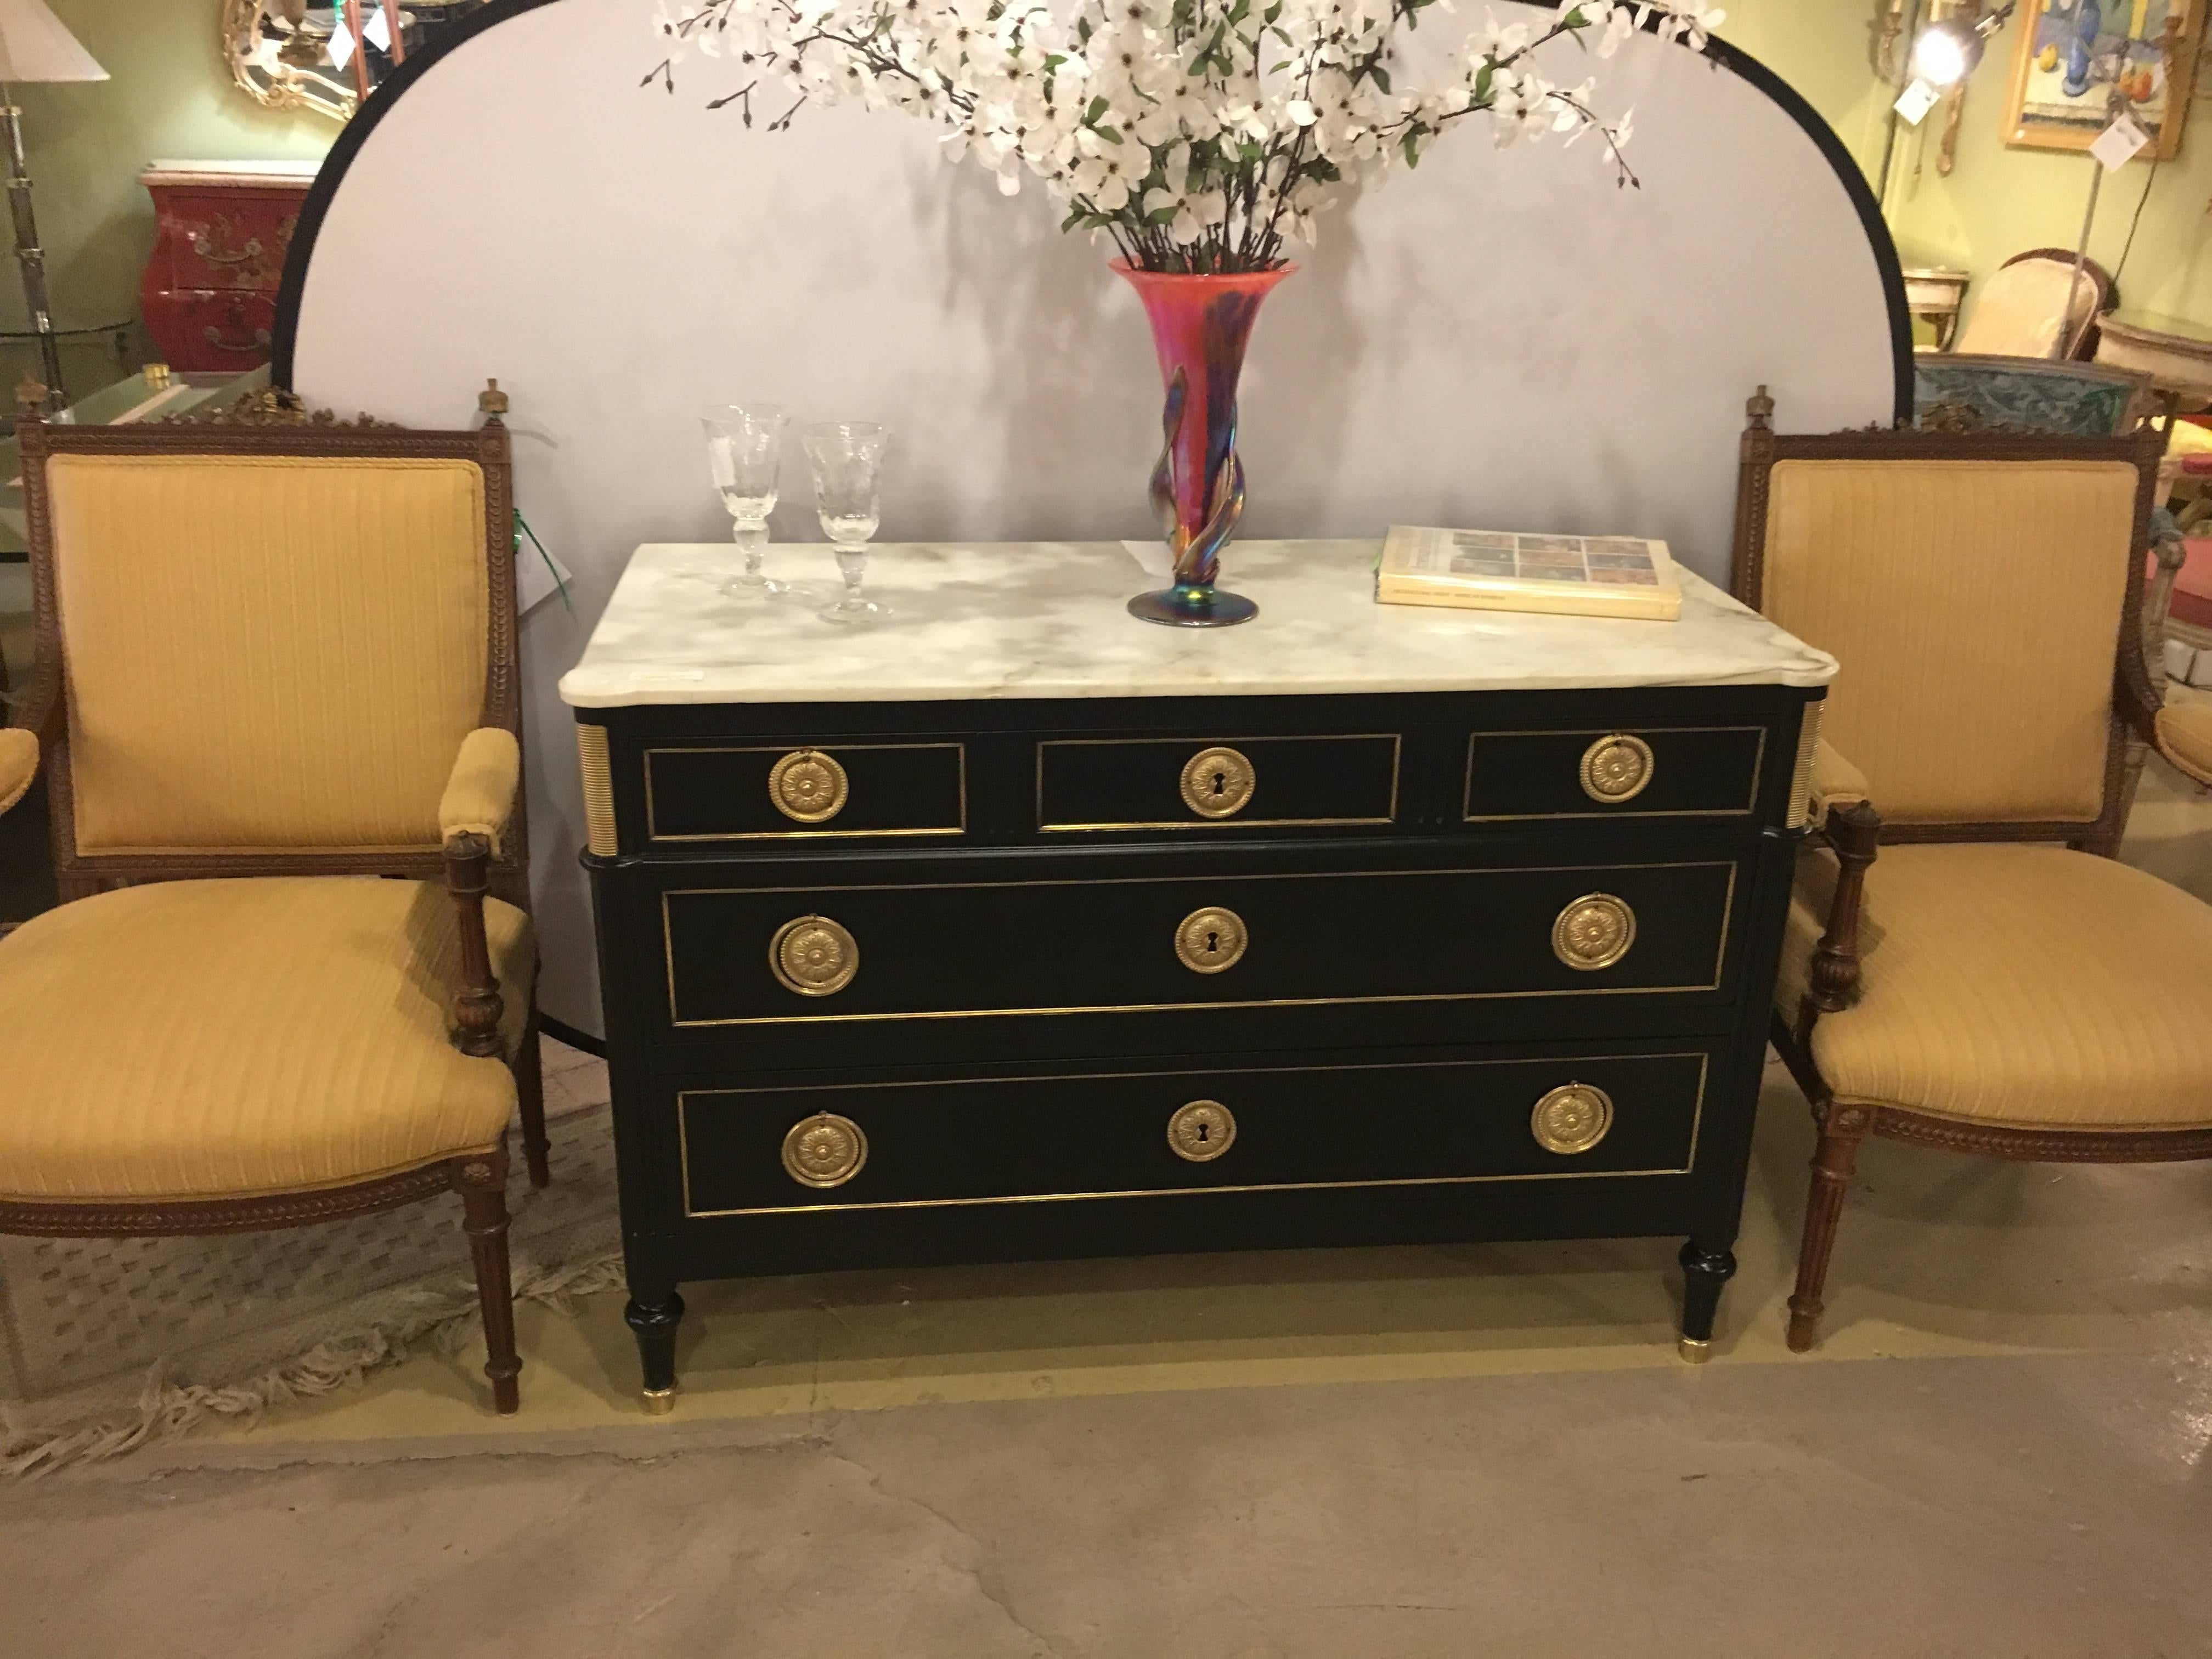 Ebonized Maison Jansen Louis XVI style mounted commode with bronze mounts. A fine ebony and gilt decorated Louis XVI Style commode or chest of drawers by this highly sought after designer. The bronze sabot feet of tapering design terminating in a